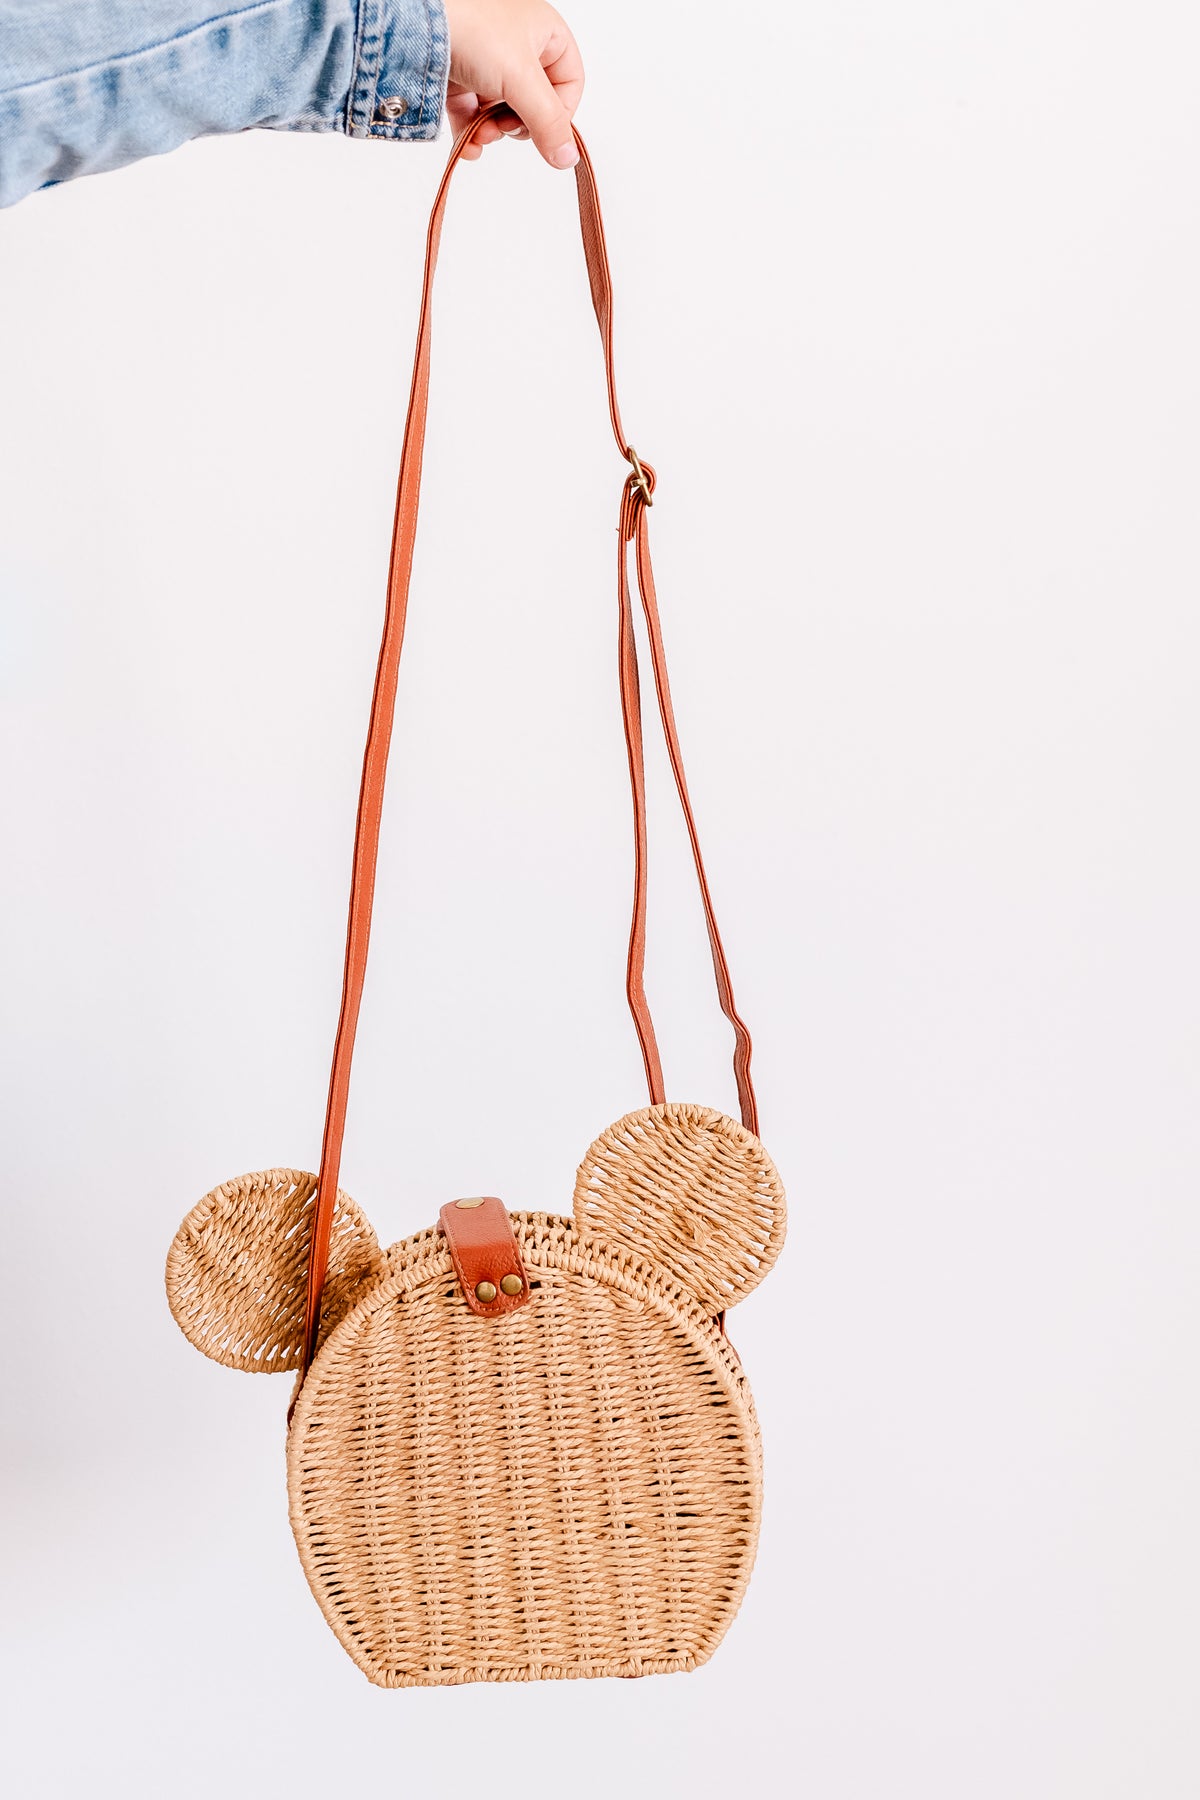 Rattan Mouse Purse | Happiest Place 2.0 Collection